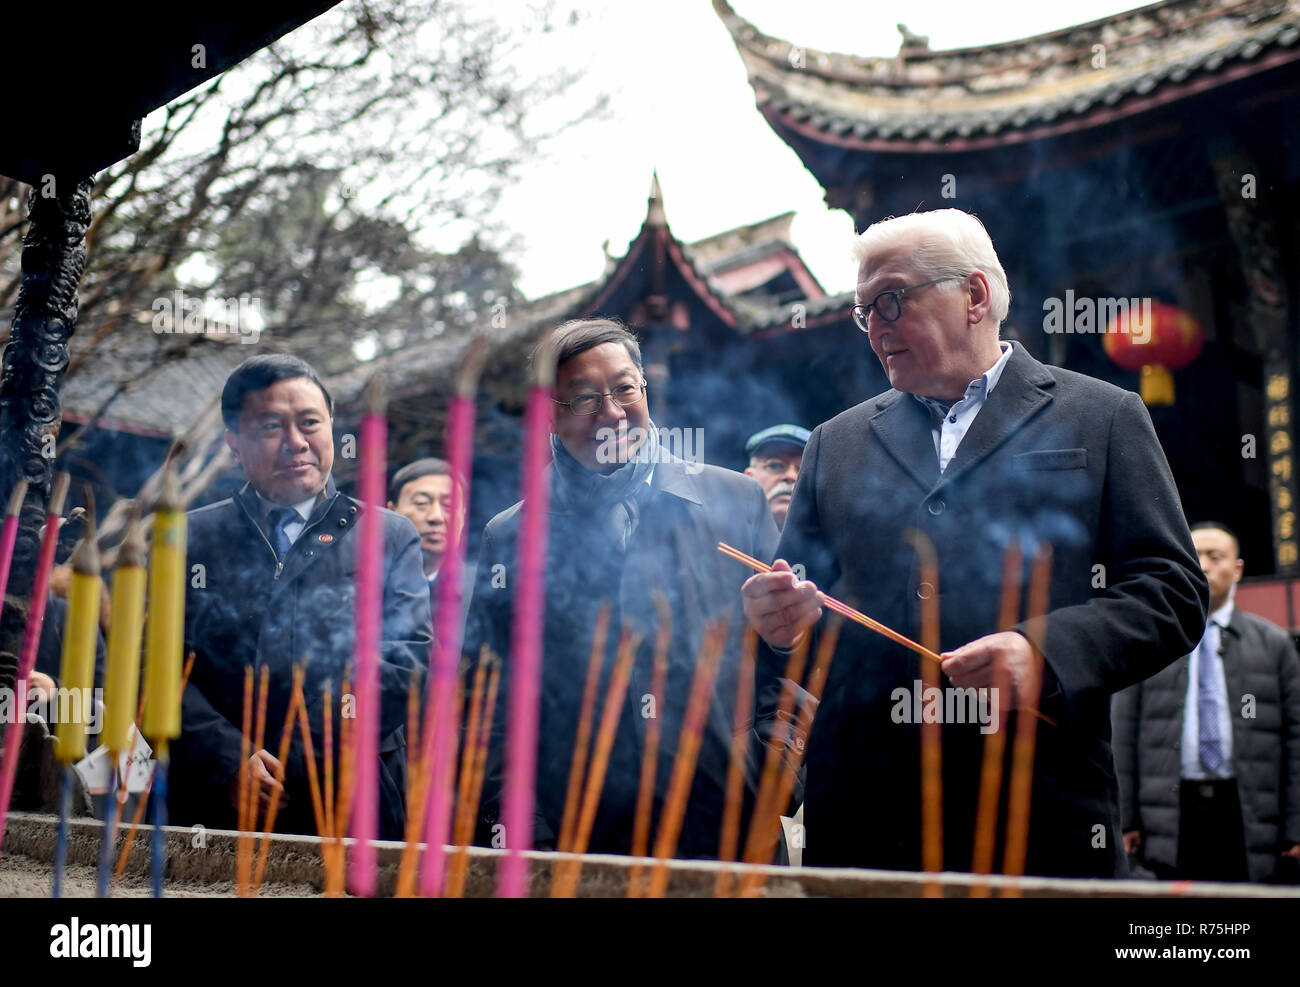 Dujiangyan, China. 08th Dec, 2018. Federal President Frank-Walter Steinmeier (r) and Shi Mingde (M), Ambassador of the People's Republic of China, light incense sticks in Erwang Temple. President Steinmeier is on a state visit to Dujiangyan on the occasion of a six-day trip to China. Credit: Britta Pedersen/dpa-Zentralbild/dpa/Alamy Live News Stock Photo